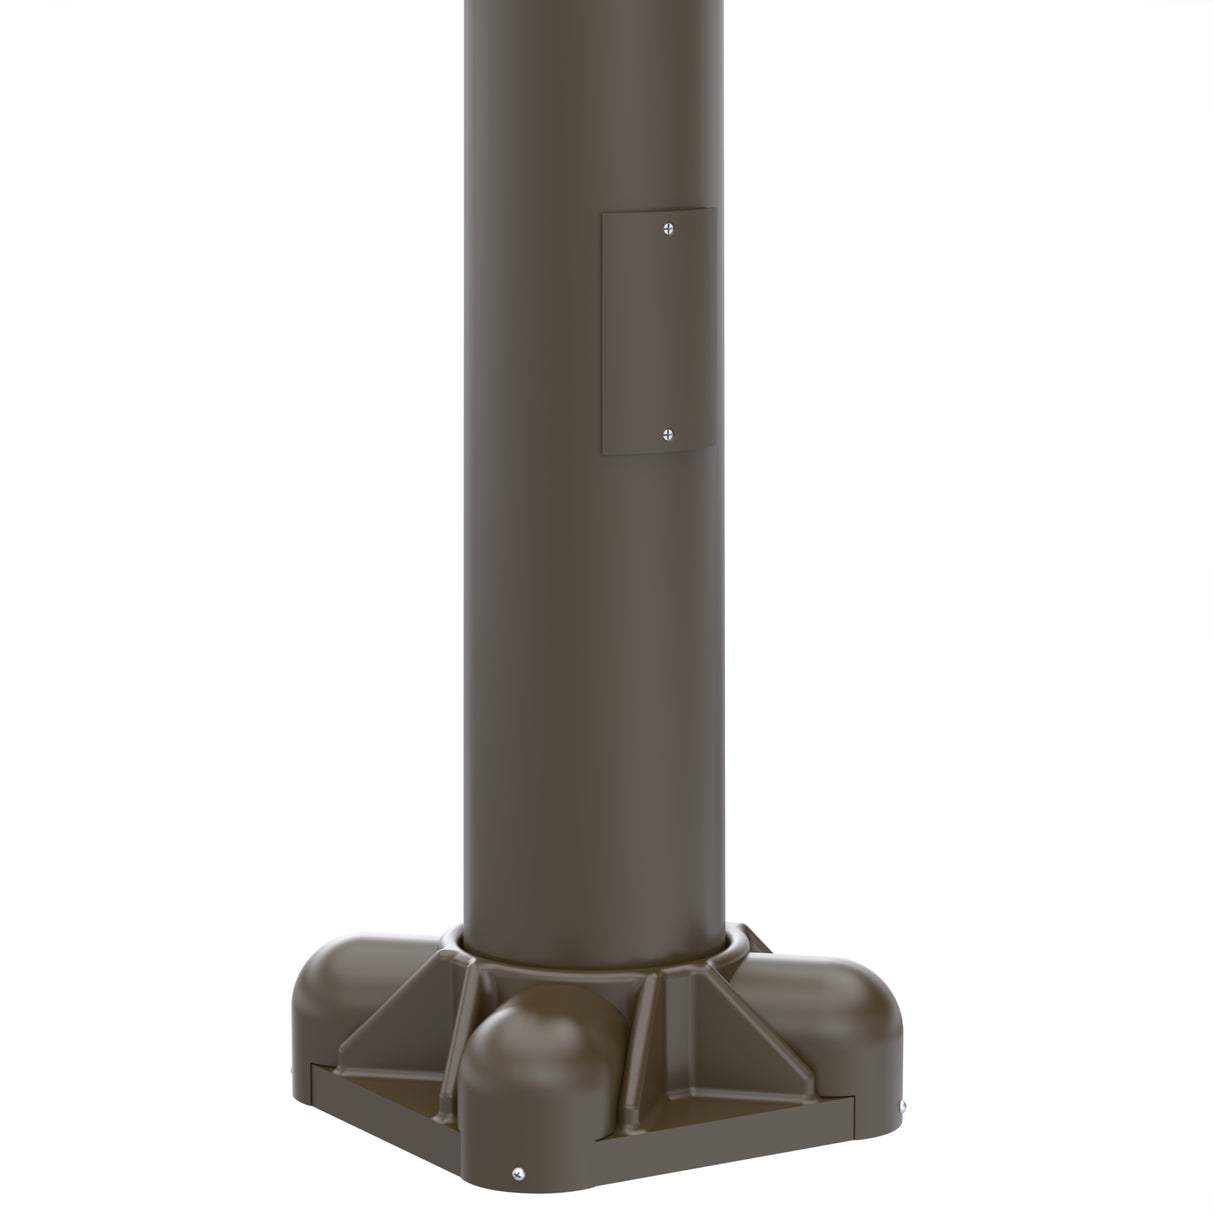 12' Tall x 4.0" Base OD x 3.0" Top OD x 0.125" Thick, Round Tapered Aluminum, Anchor Base Light Pole